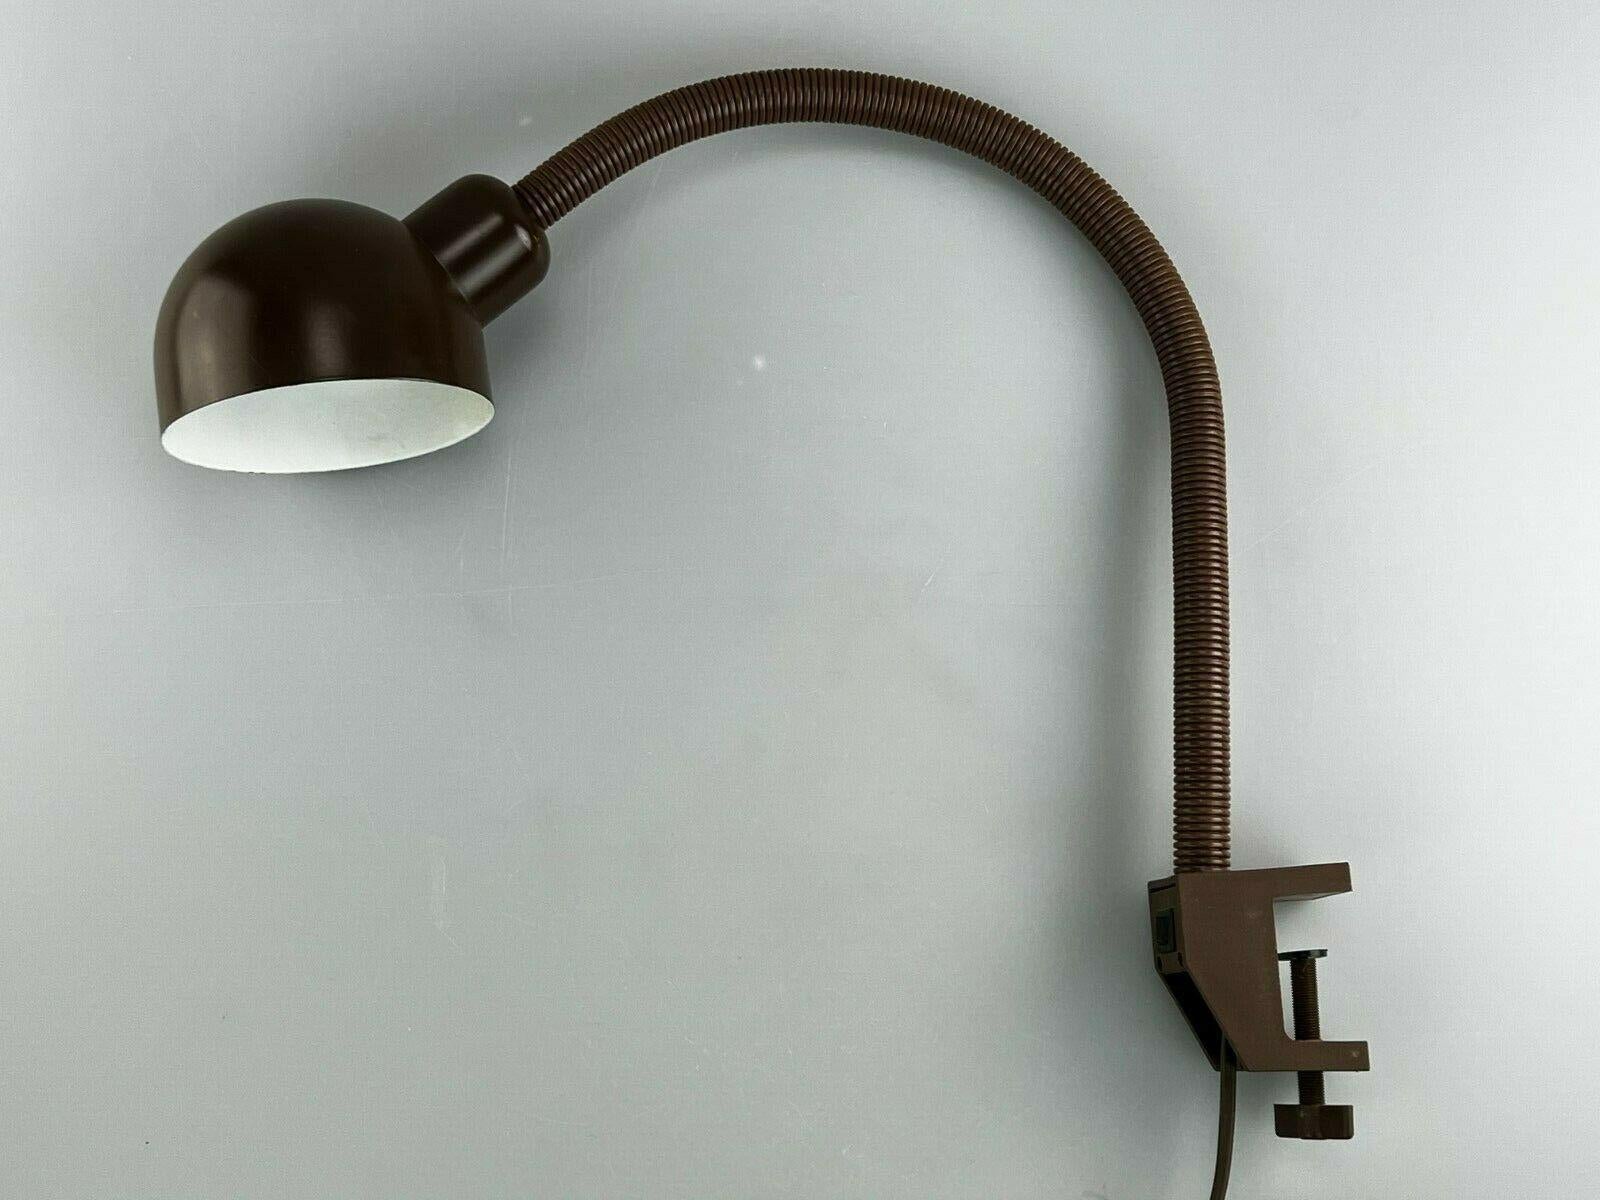 60s 70s lamp light desk lamp flexible design Germany 50s 60s

Object: table lamp

Manufacturer:

Condition: good - vintage

Age: around 1960-1970

Dimensions:

50cm x 43cm x 13cm

Other notes:

The pictures serve as part of the